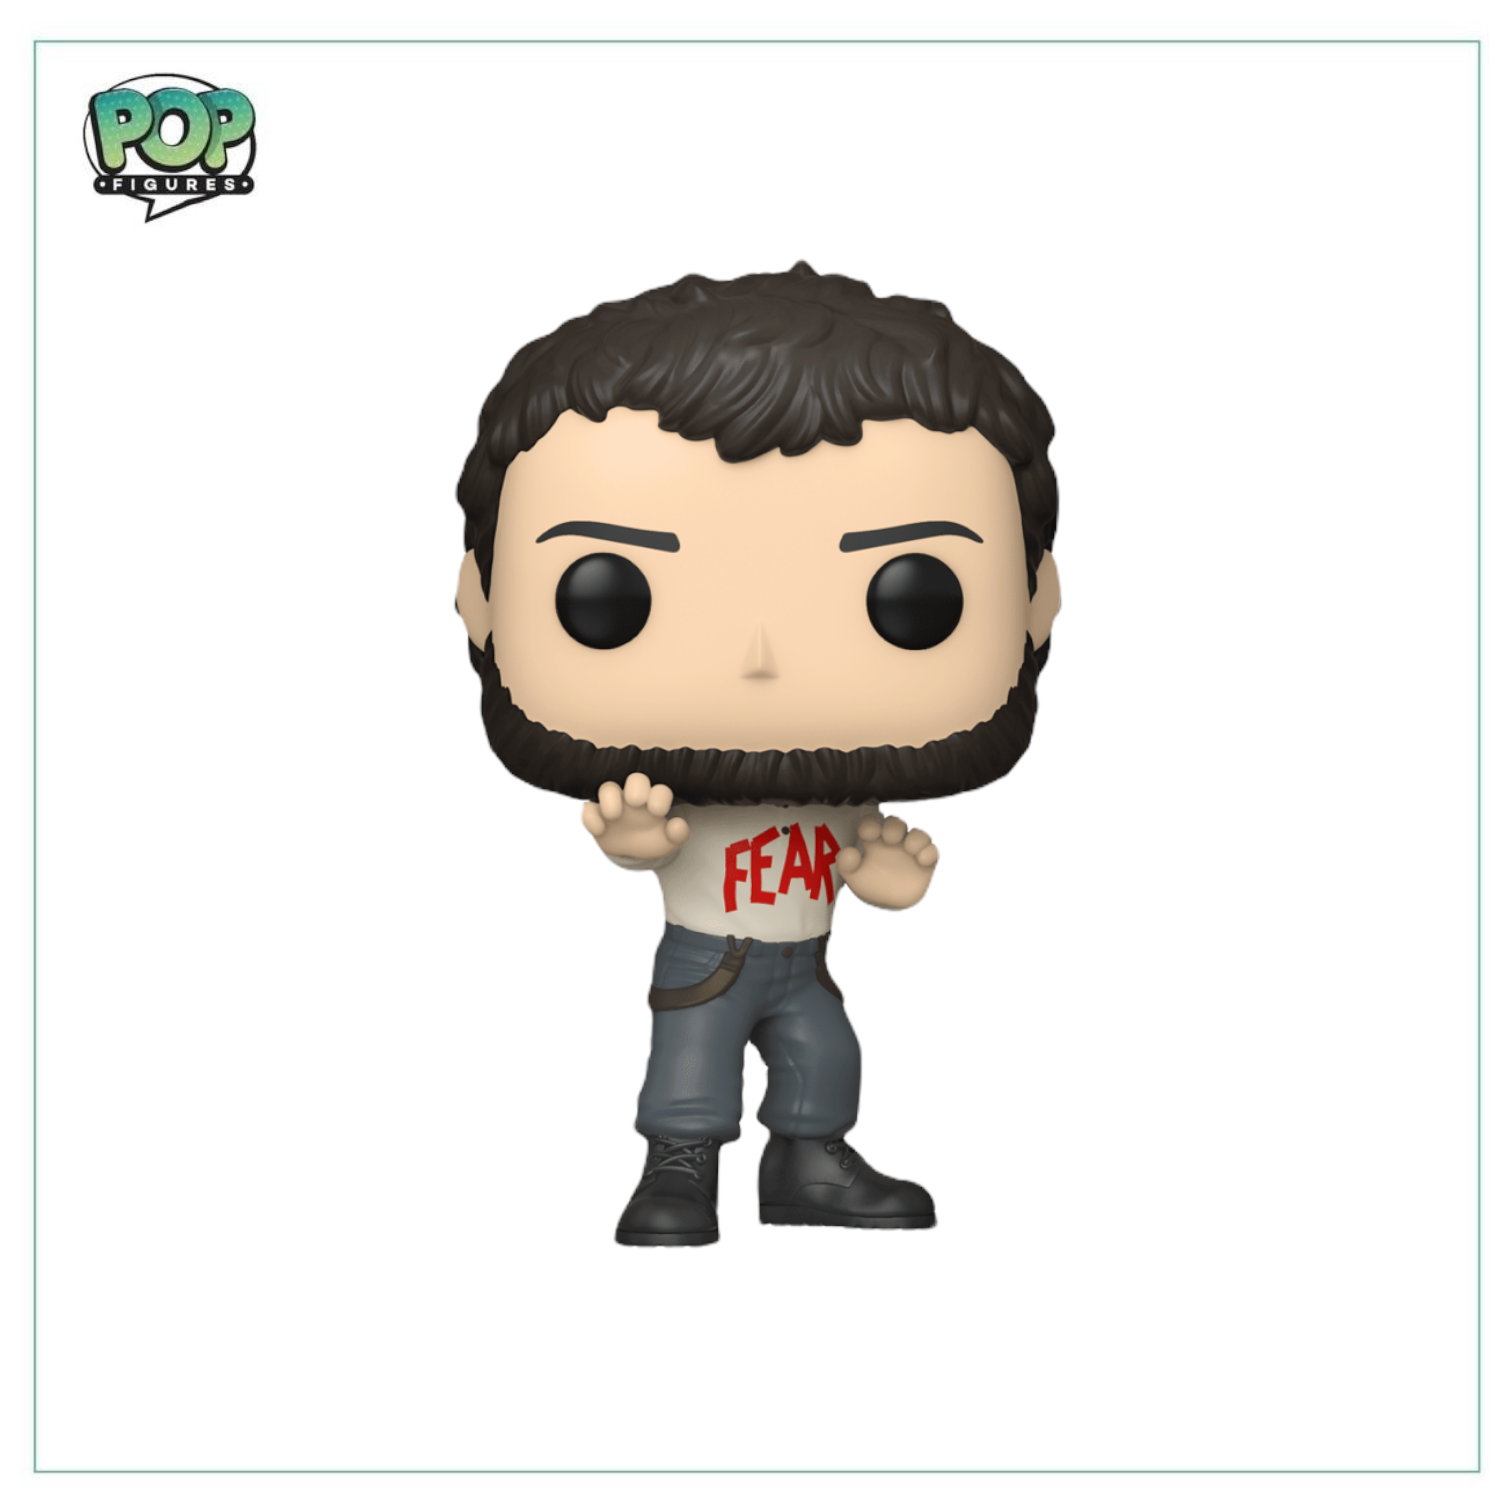 Mose Schrute #1179 Funko Pop! The Office -  2021 NYCC Shared Exclusive